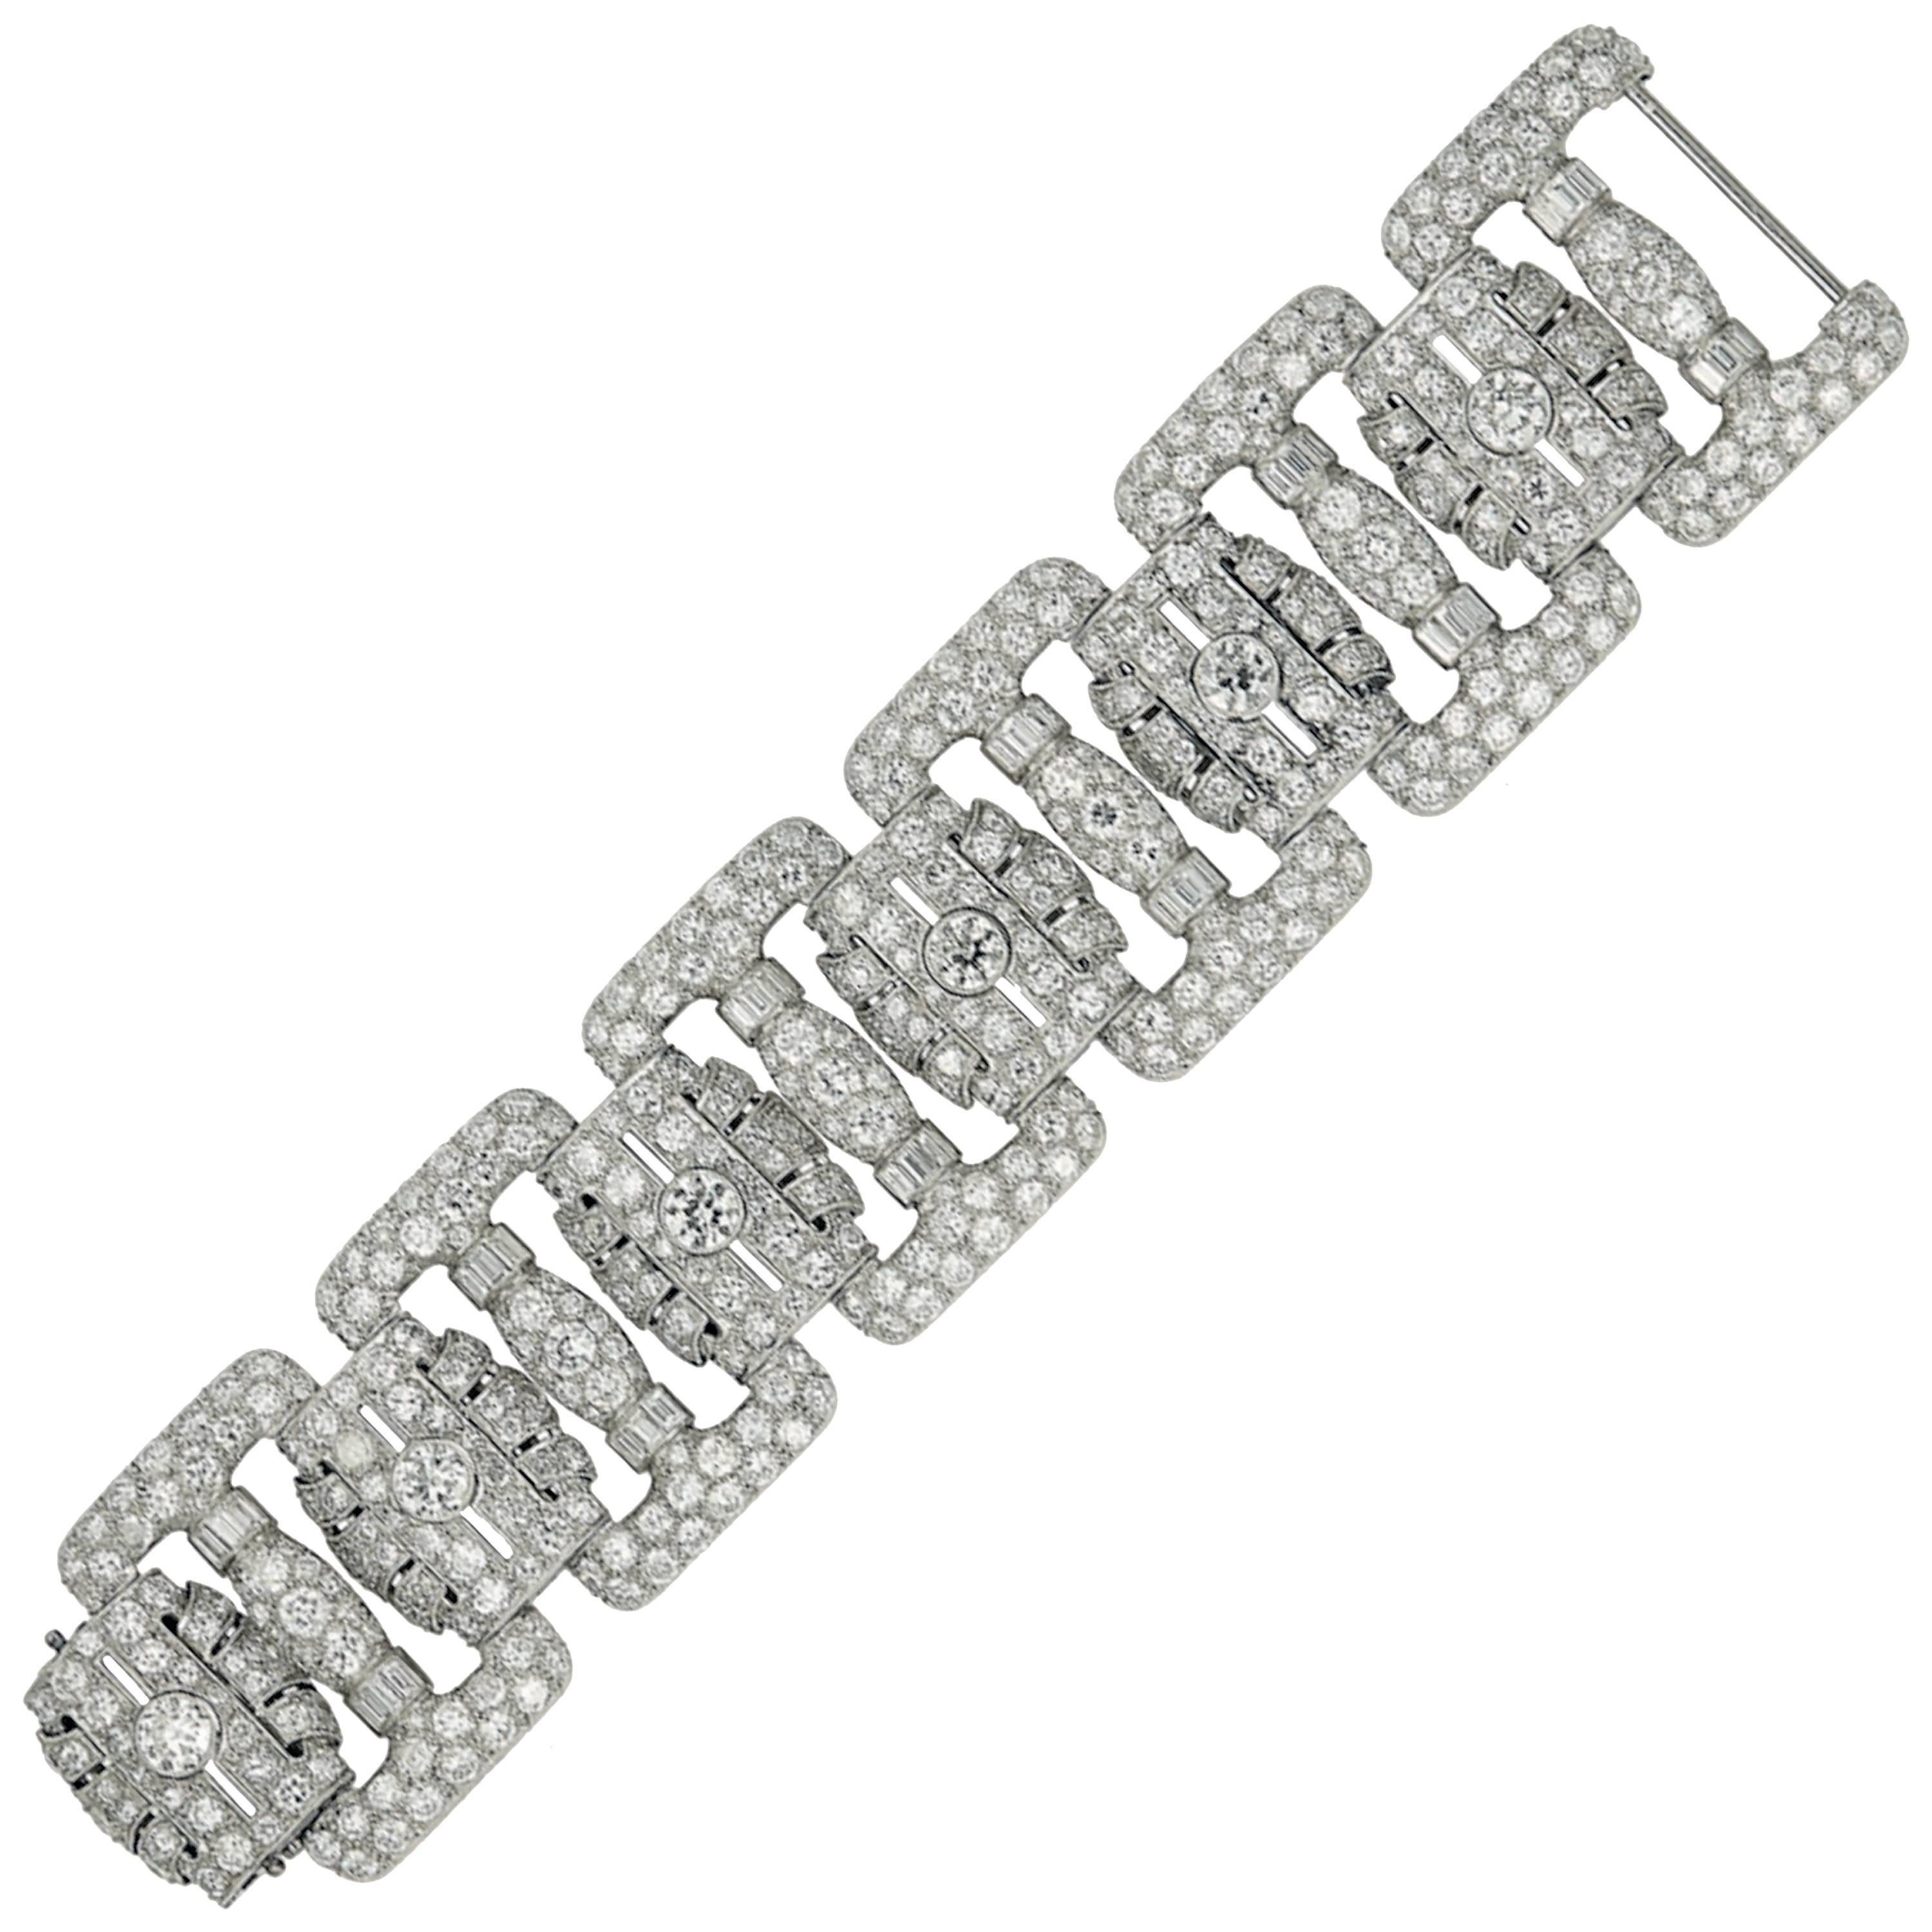 American Art Deco Diamond Platinum Bracelet
Composed of six rectangular openwork panels, the connecting links of geometrical design, set throughout with old-cut diamonds.
Circa 1930.
Total diamond: approximately 45.00 carats.
Length: 7.40 inches